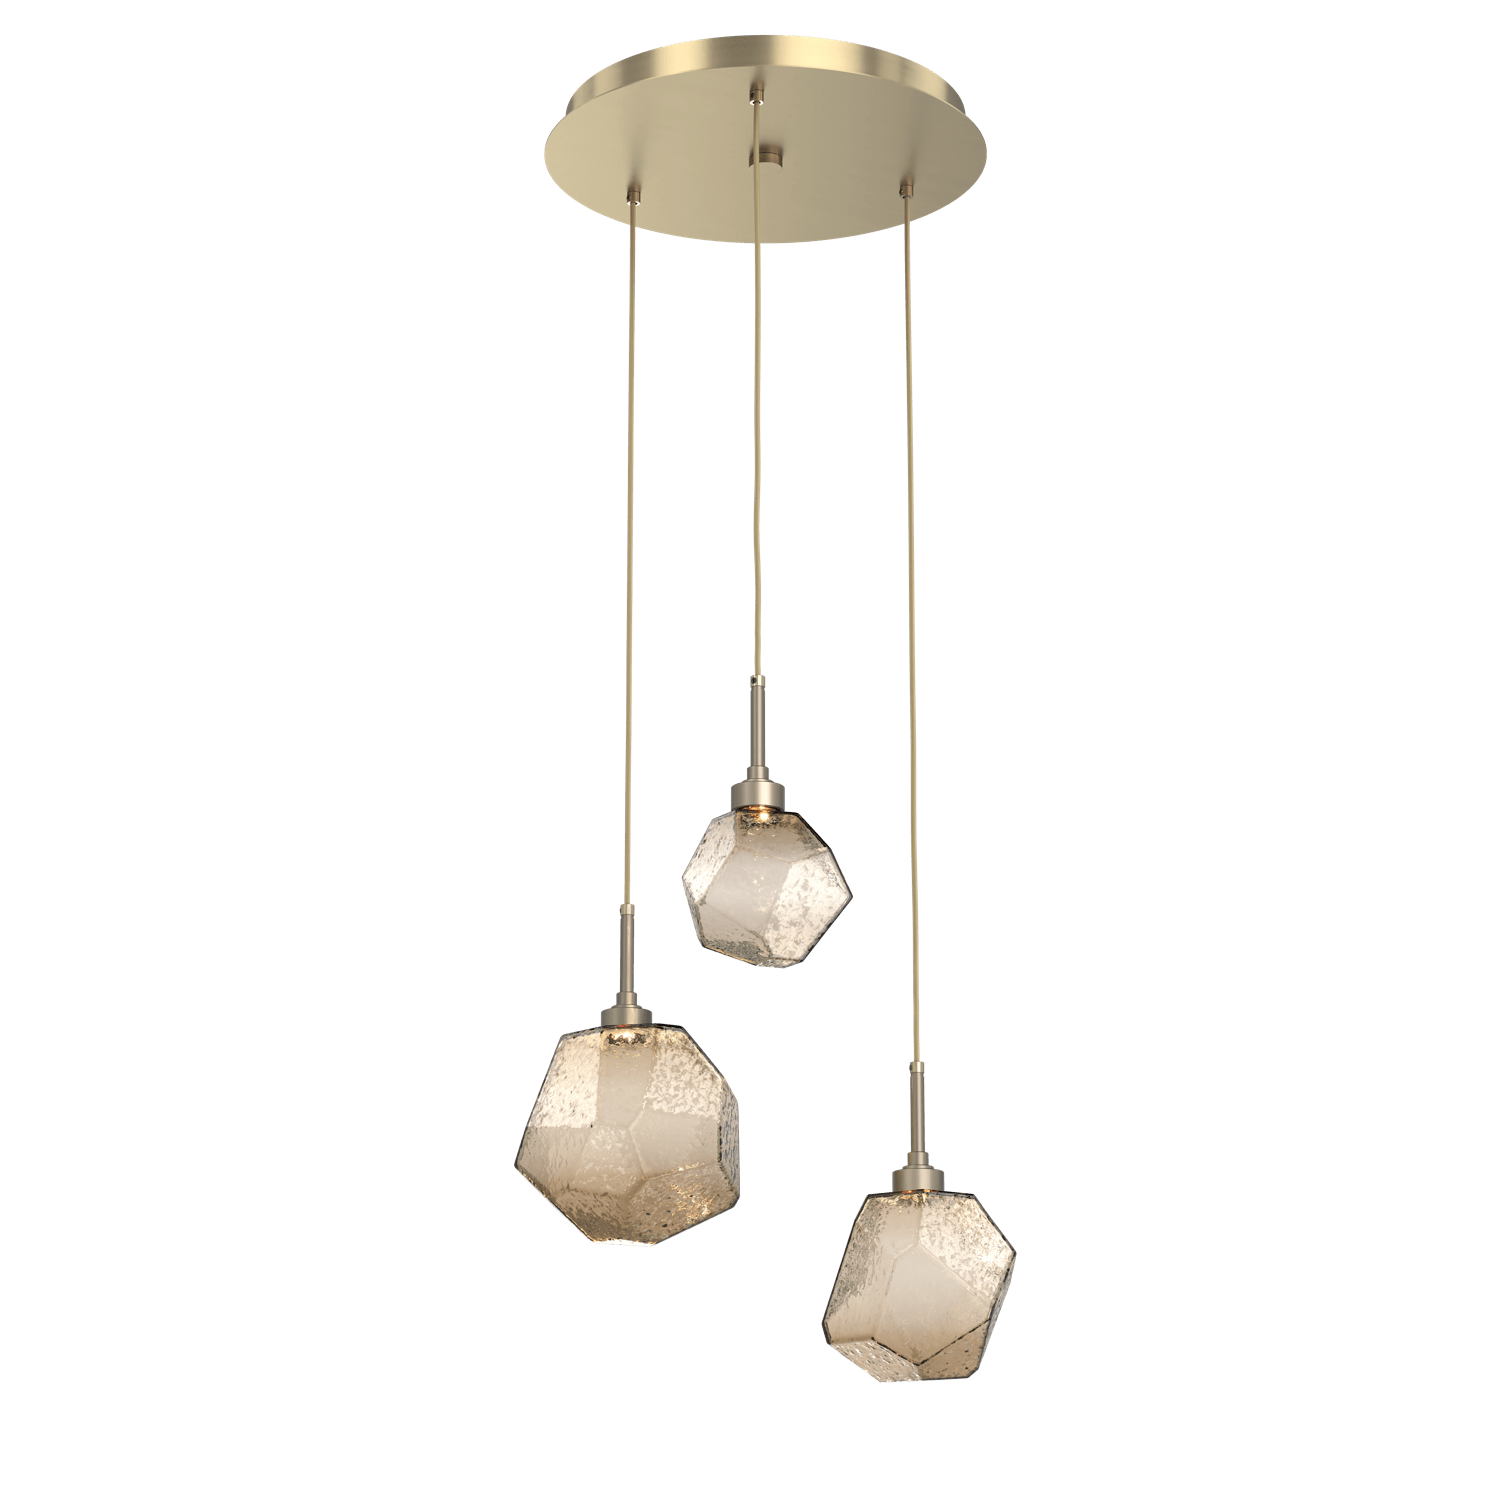 CHB0039-03-HB-B-Hammerton-Studio-Gem-3-light-round-pendant-chandelier-with-heritage-brass-finish-and-bronze-blown-glass-shades-and-LED-lamping